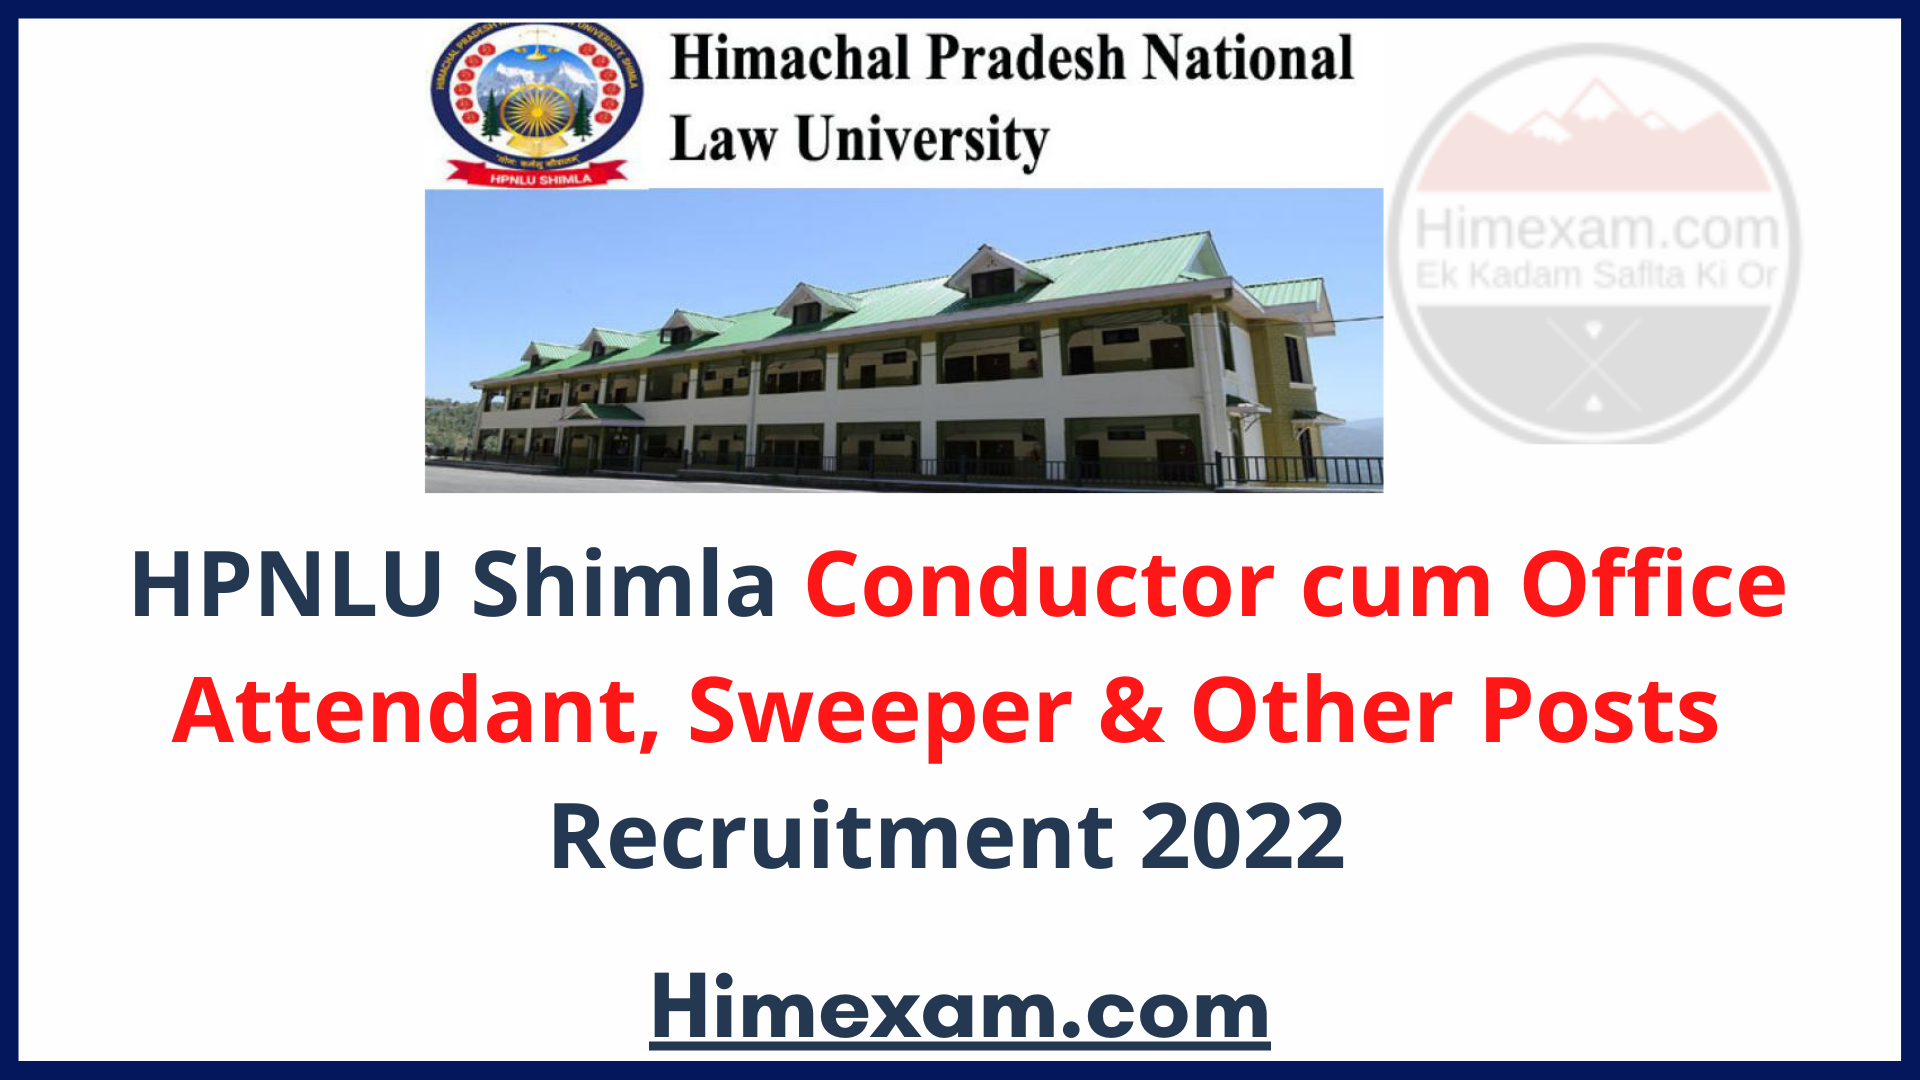 HPNLU Shimla Conductor cum Office Attendant, Sweeper & Other Posts Recruitment 2022